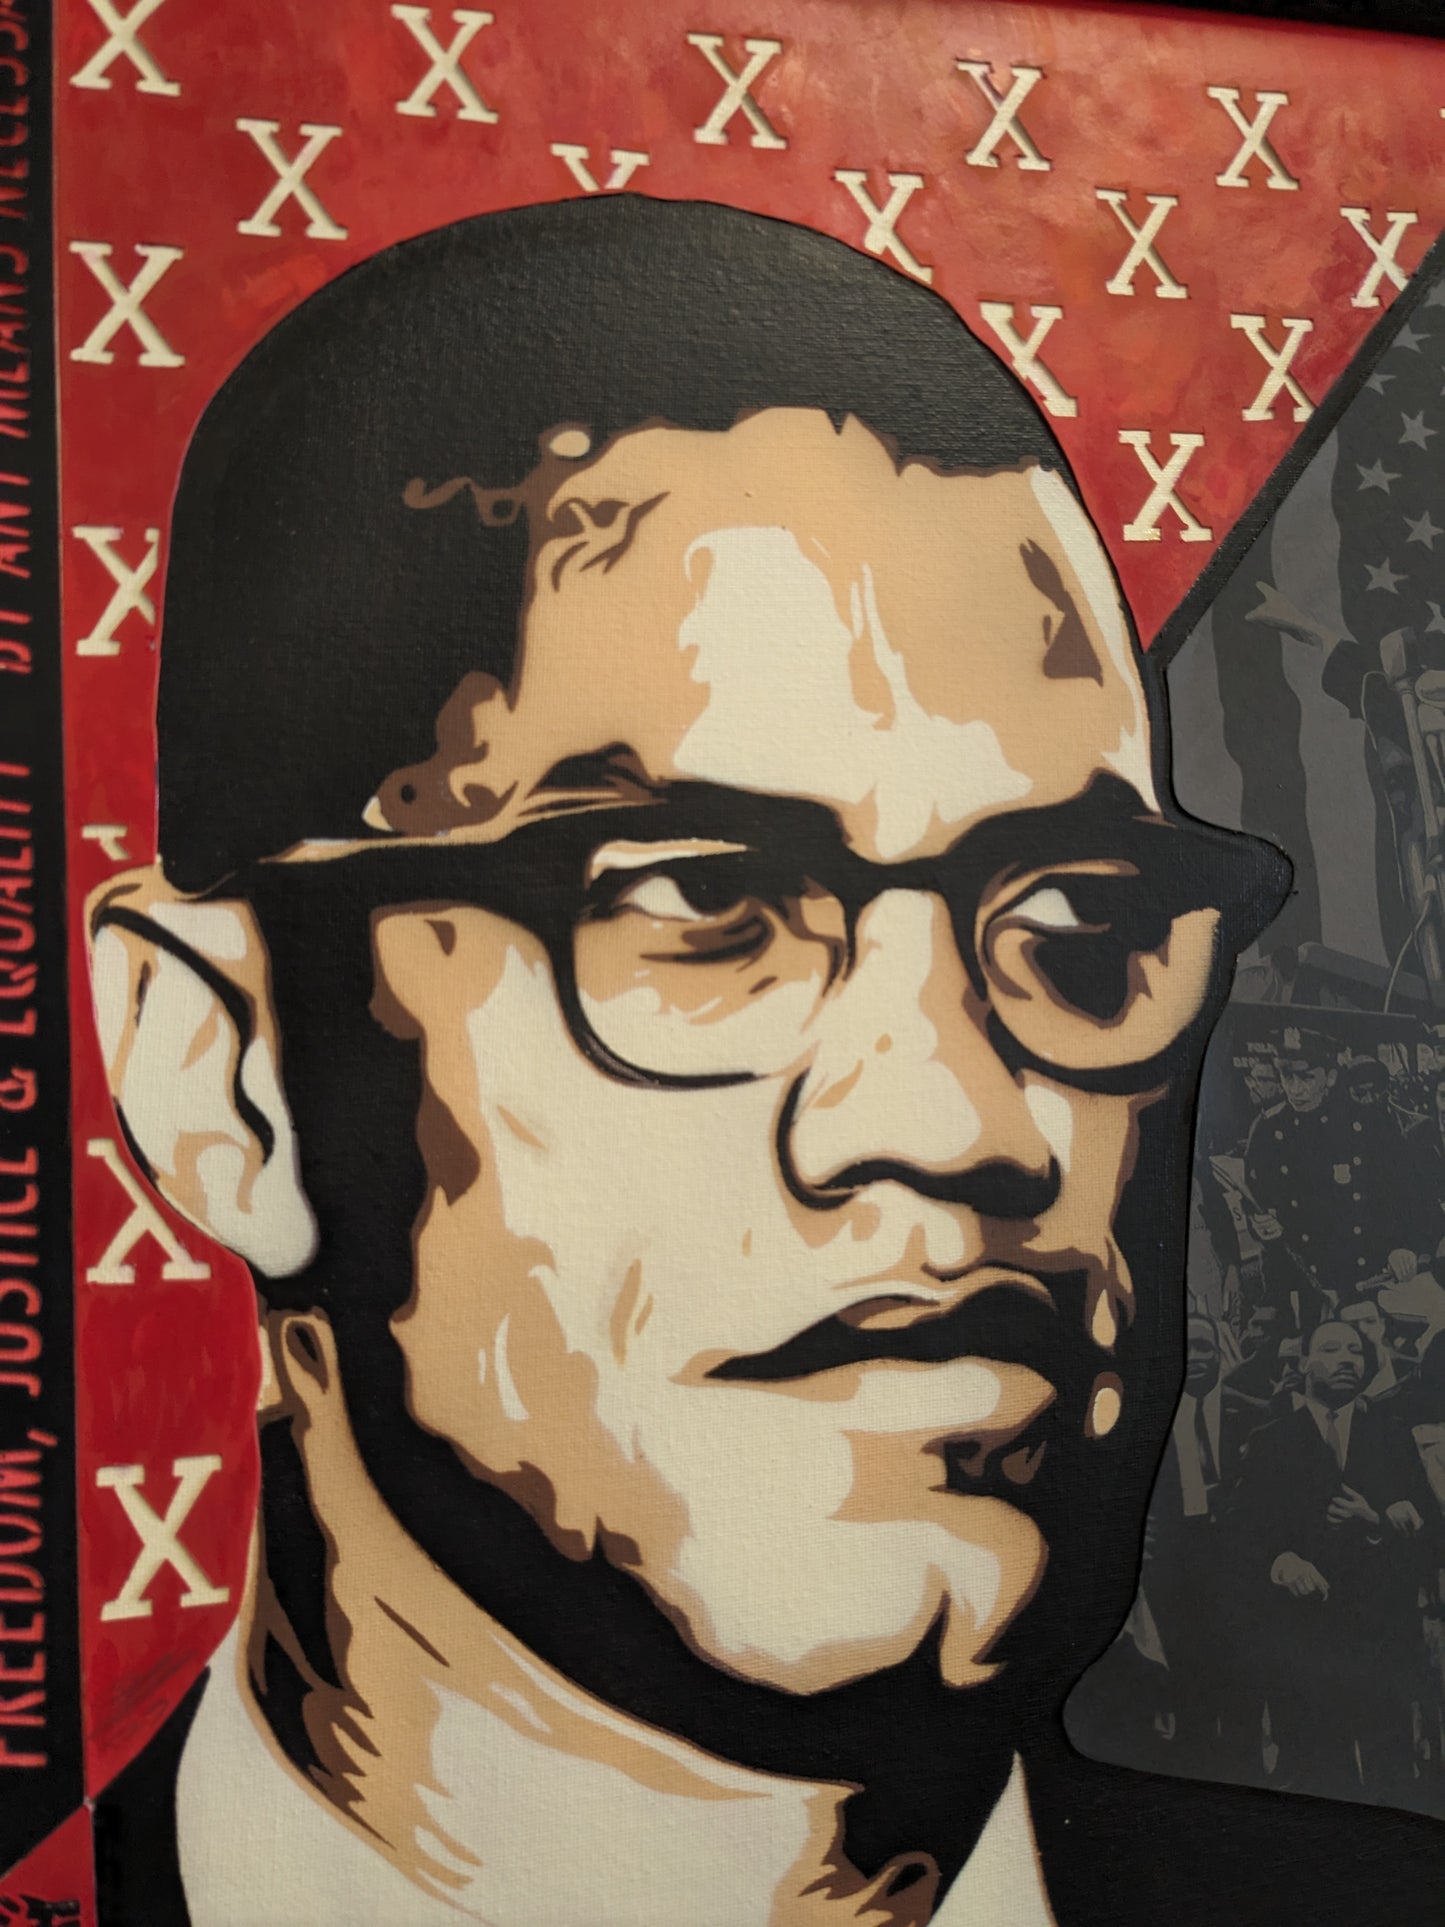 "By Any Means Necessary" Malcolm X Original Painting (20.8" x 24.8")